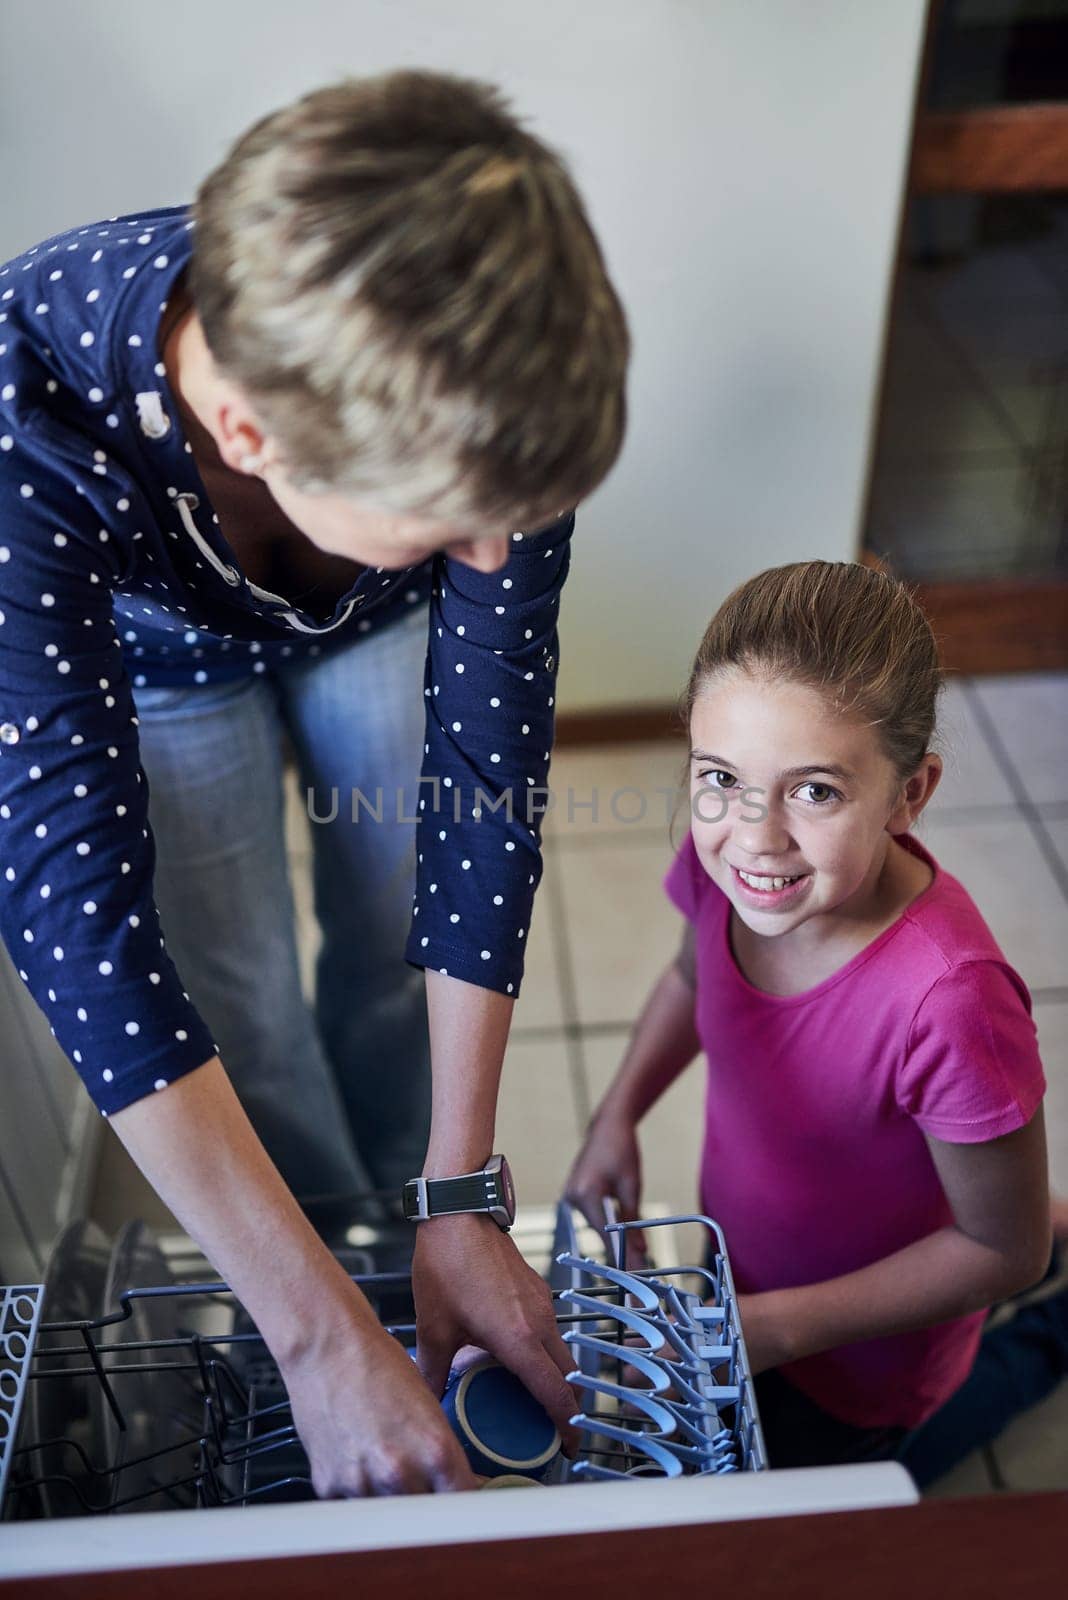 Dishwasher, mother and daughter in portrait cleaning kitchen together with help, learning or teaching. Housework, mom and girl in home washing dishes in machine with smile, support and morning chores by YuriArcurs